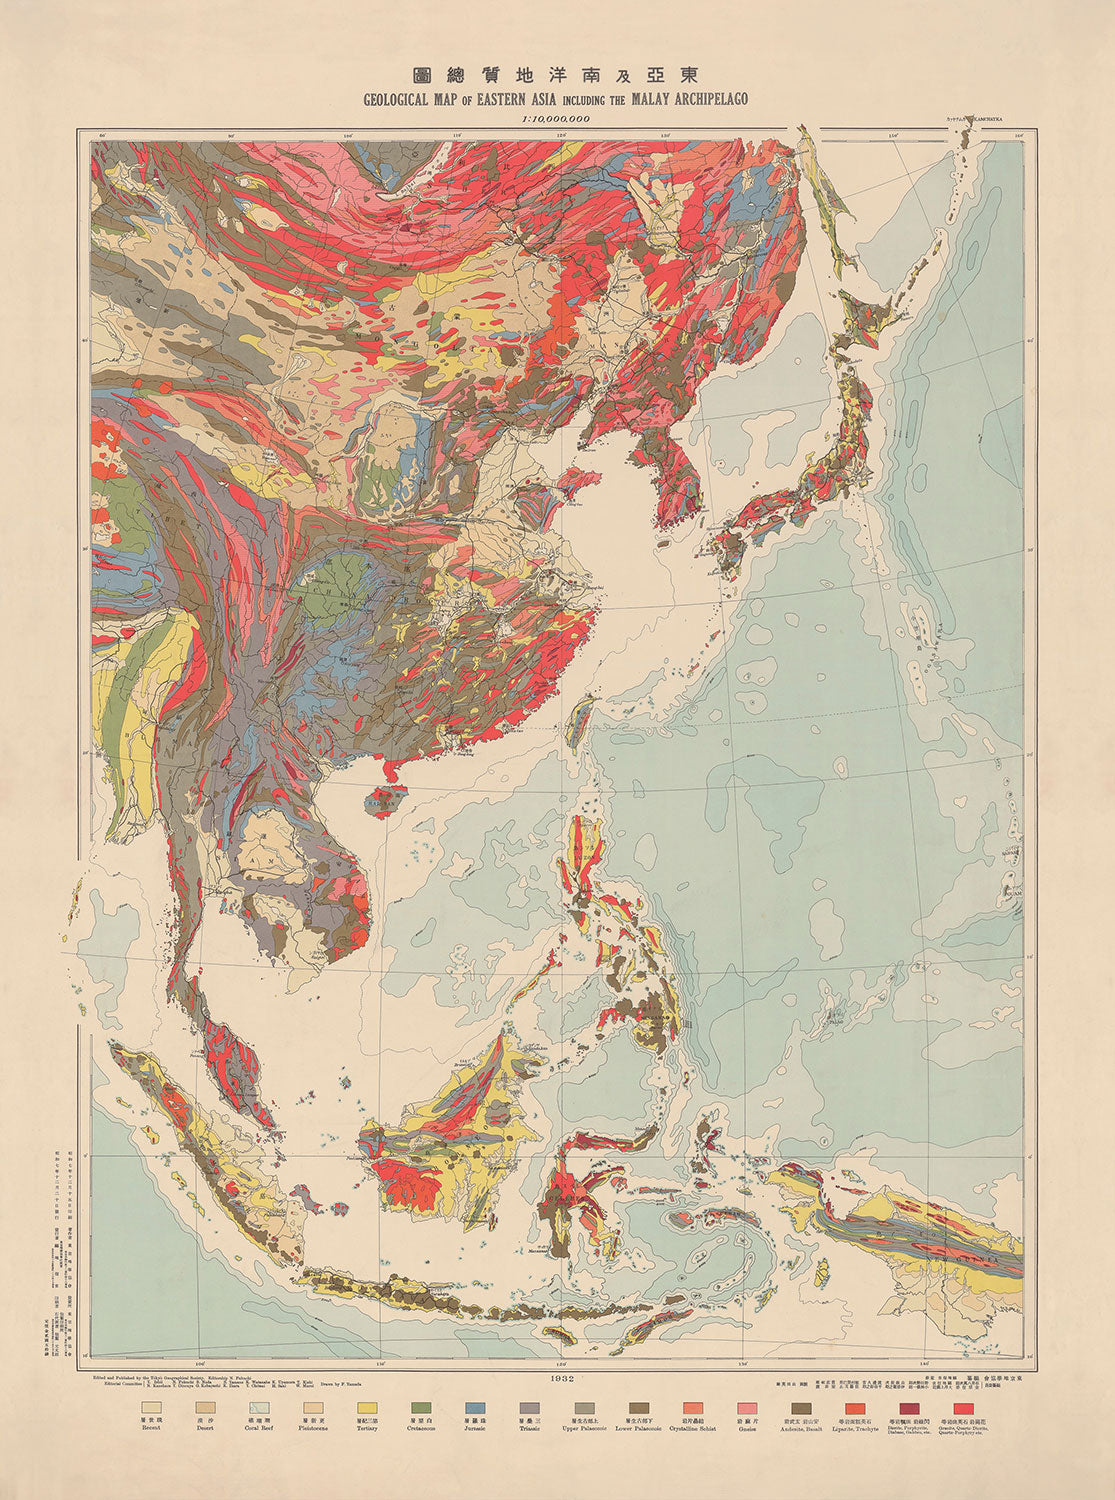 Old Geological Map of Eastern Asia and Malay Archipelago in 1932 by Tokyo Geology Society - Japan, China, Indonesia, Vietnam, Taiwan